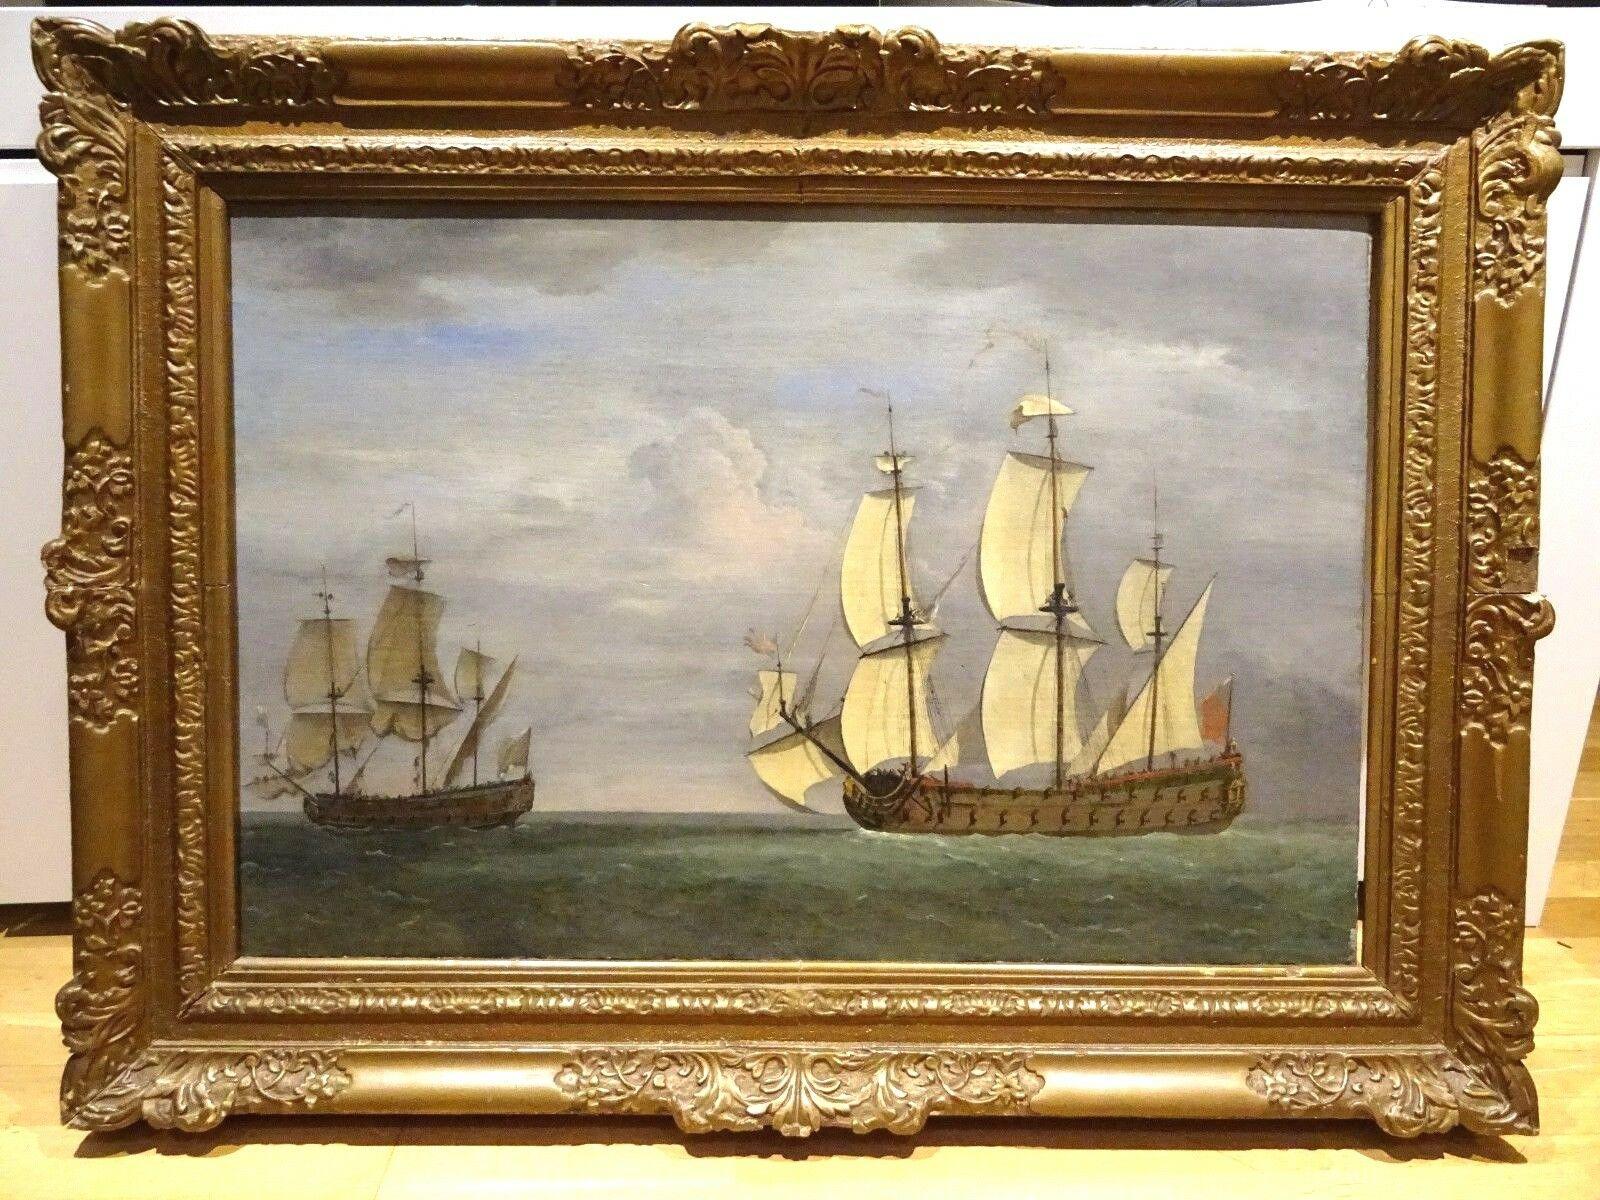 French Ship Under Press From The Royal Navy, 17th Century - Painting by Wilhelm van de Velde the Younger